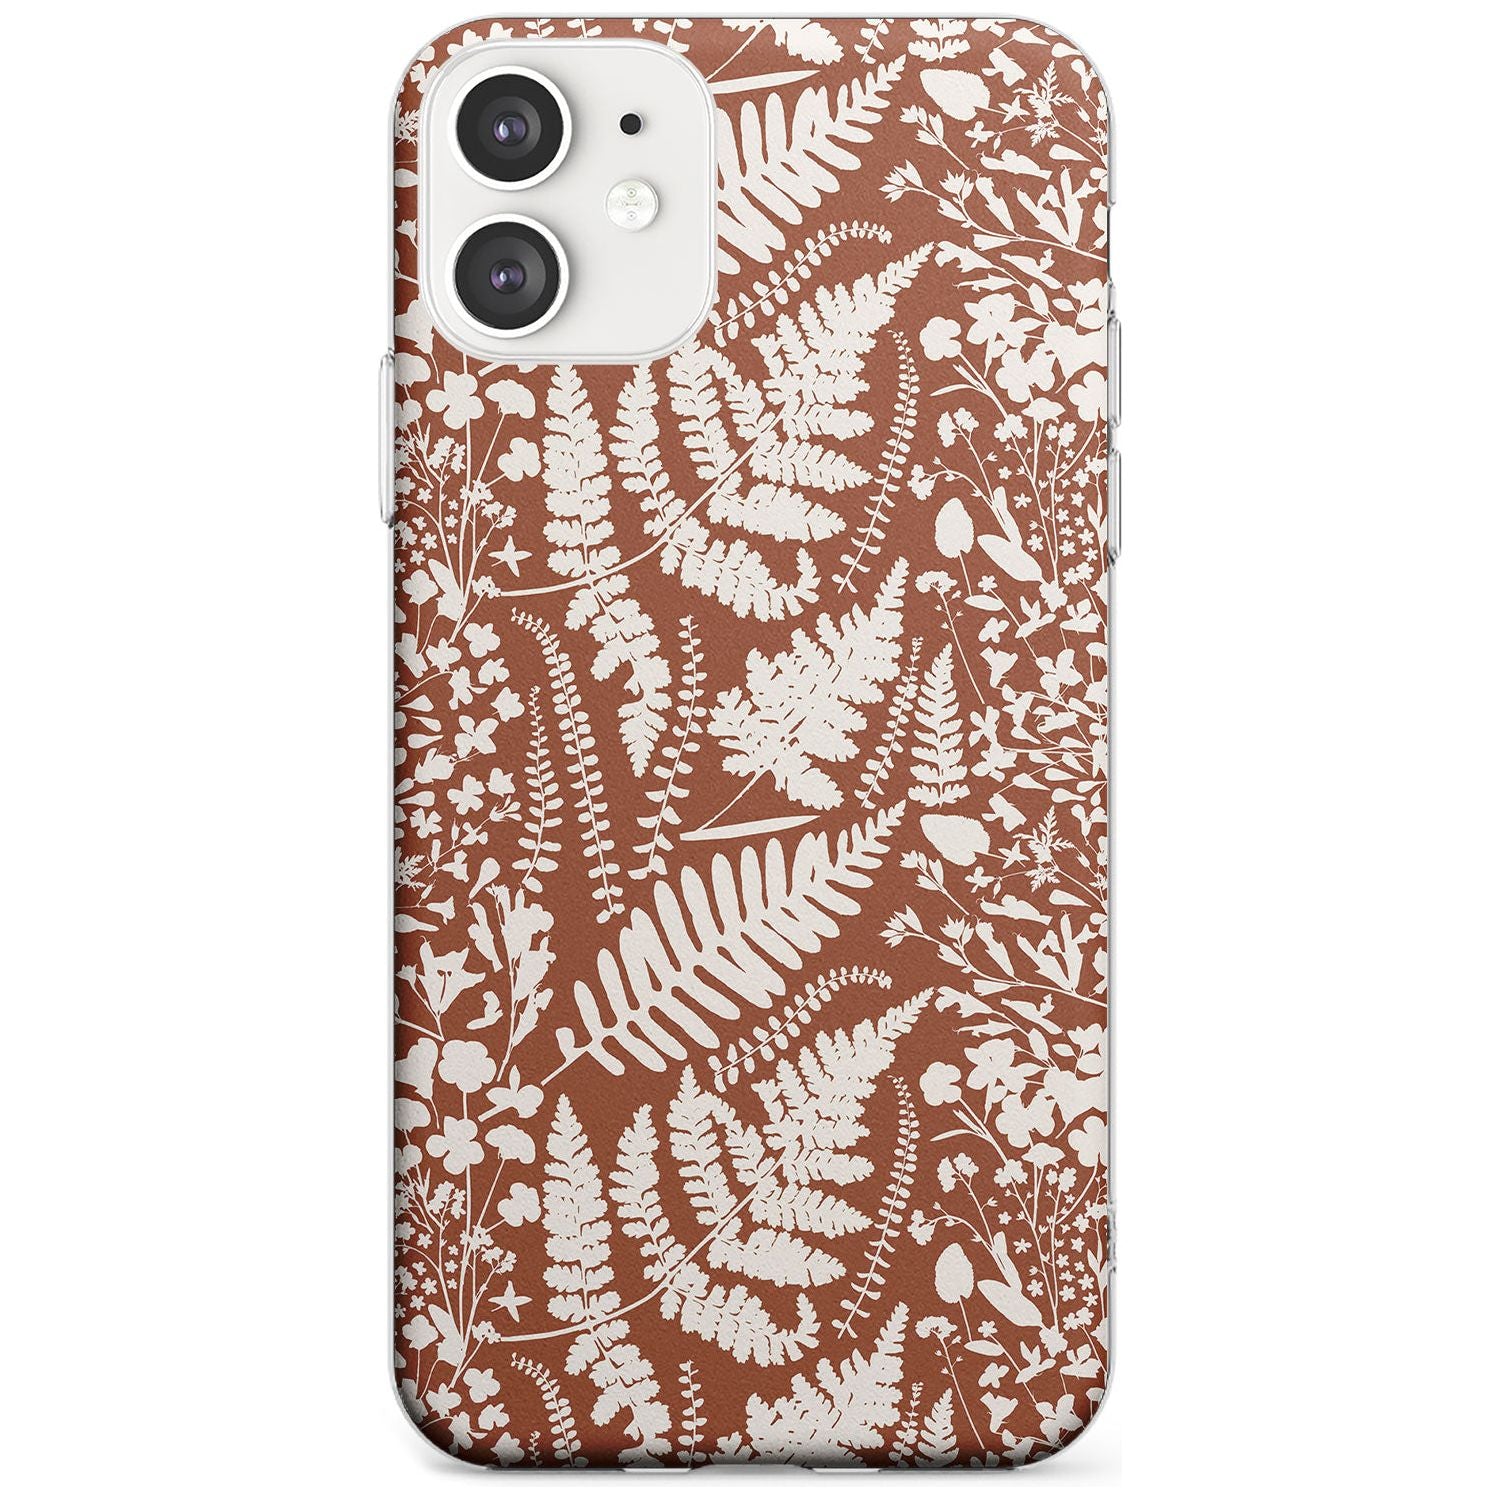 Wildflowers and Ferns on Terracotta Slim TPU Phone Case for iPhone 11